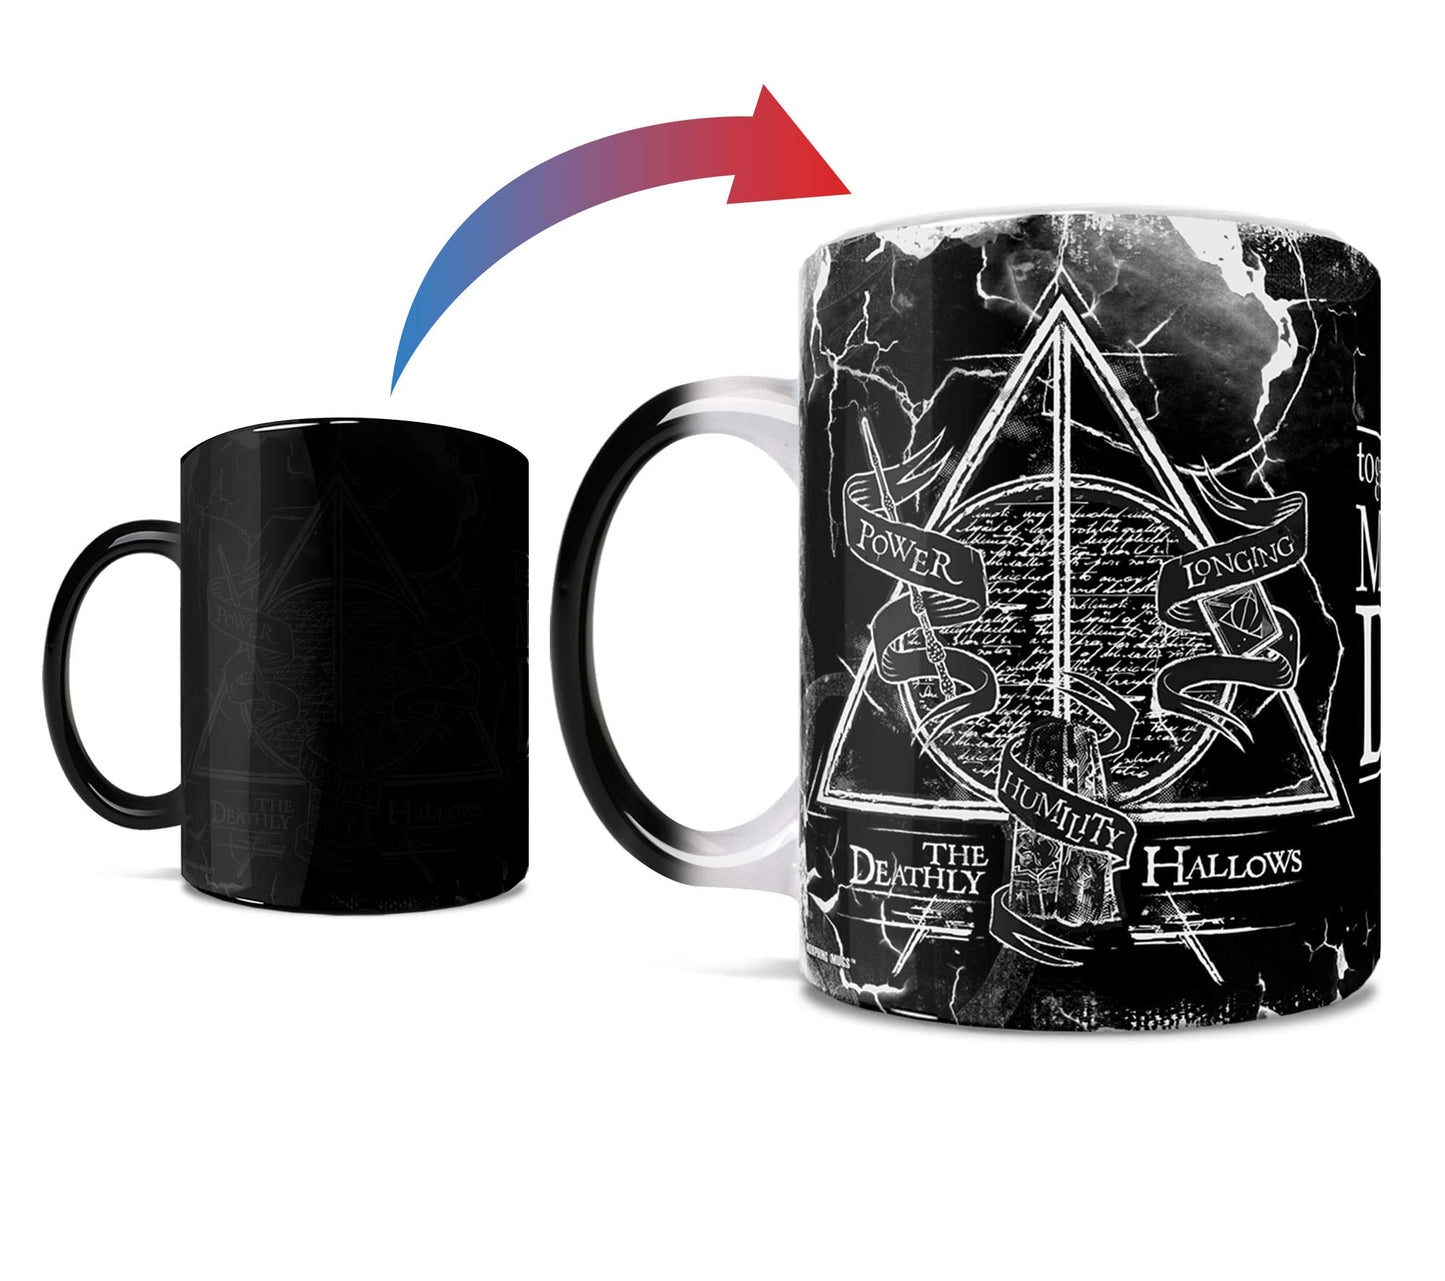 Harry Potter - The Deathly Hallows - Power Longing Humility Quote - Master of Death - One 11 oz Morphing Mugs Color Changing Heat Sensitive Ceramic Mug – Image Revealed When HOT Liquid Is Added!